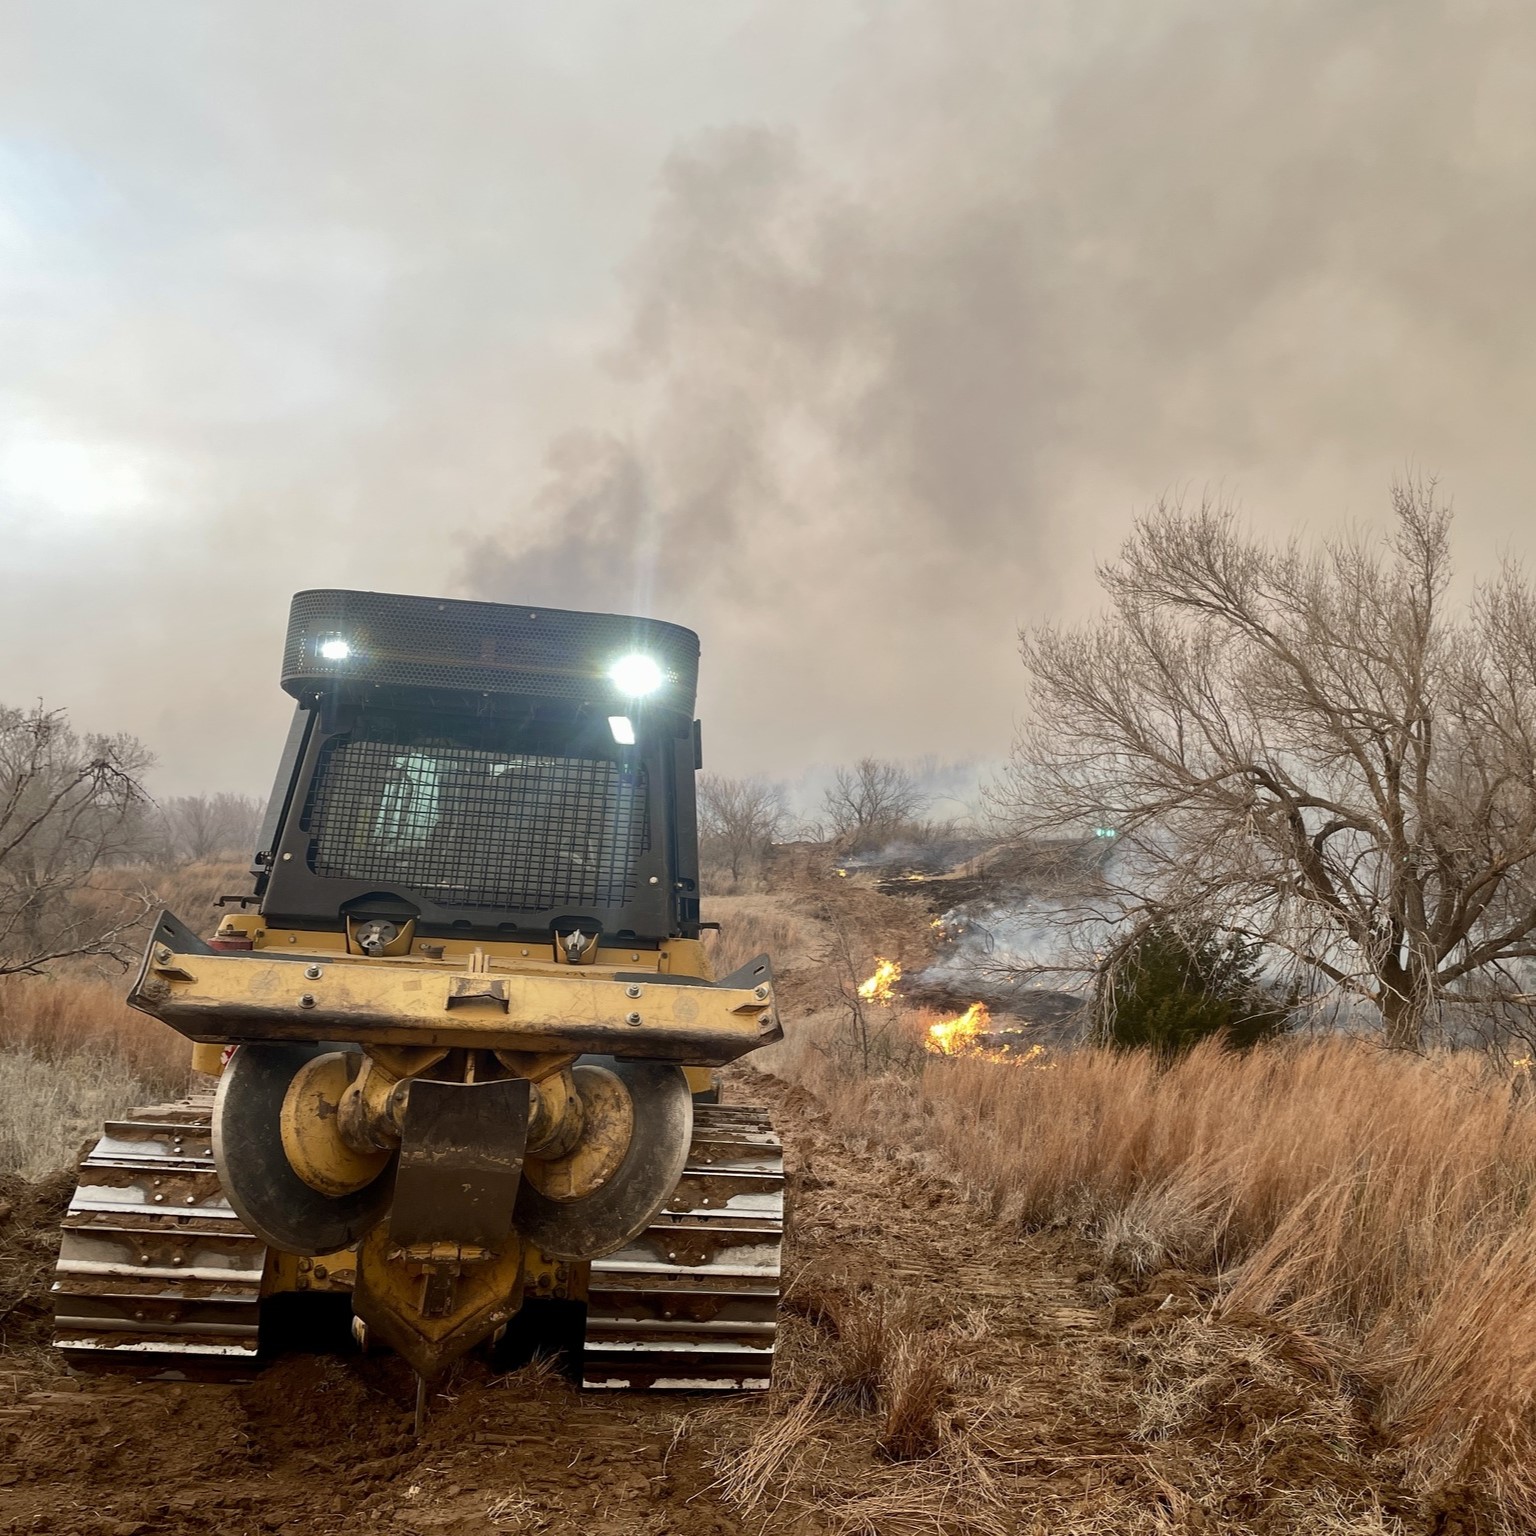 <p>&#160;The largest wildfire in Texas history is actively burning today. The Smokehouse Creek Fire in Hutchinson County is burning a total of 1,075,000 acres across Texas and Oklahoma and is 3% contained.</p>